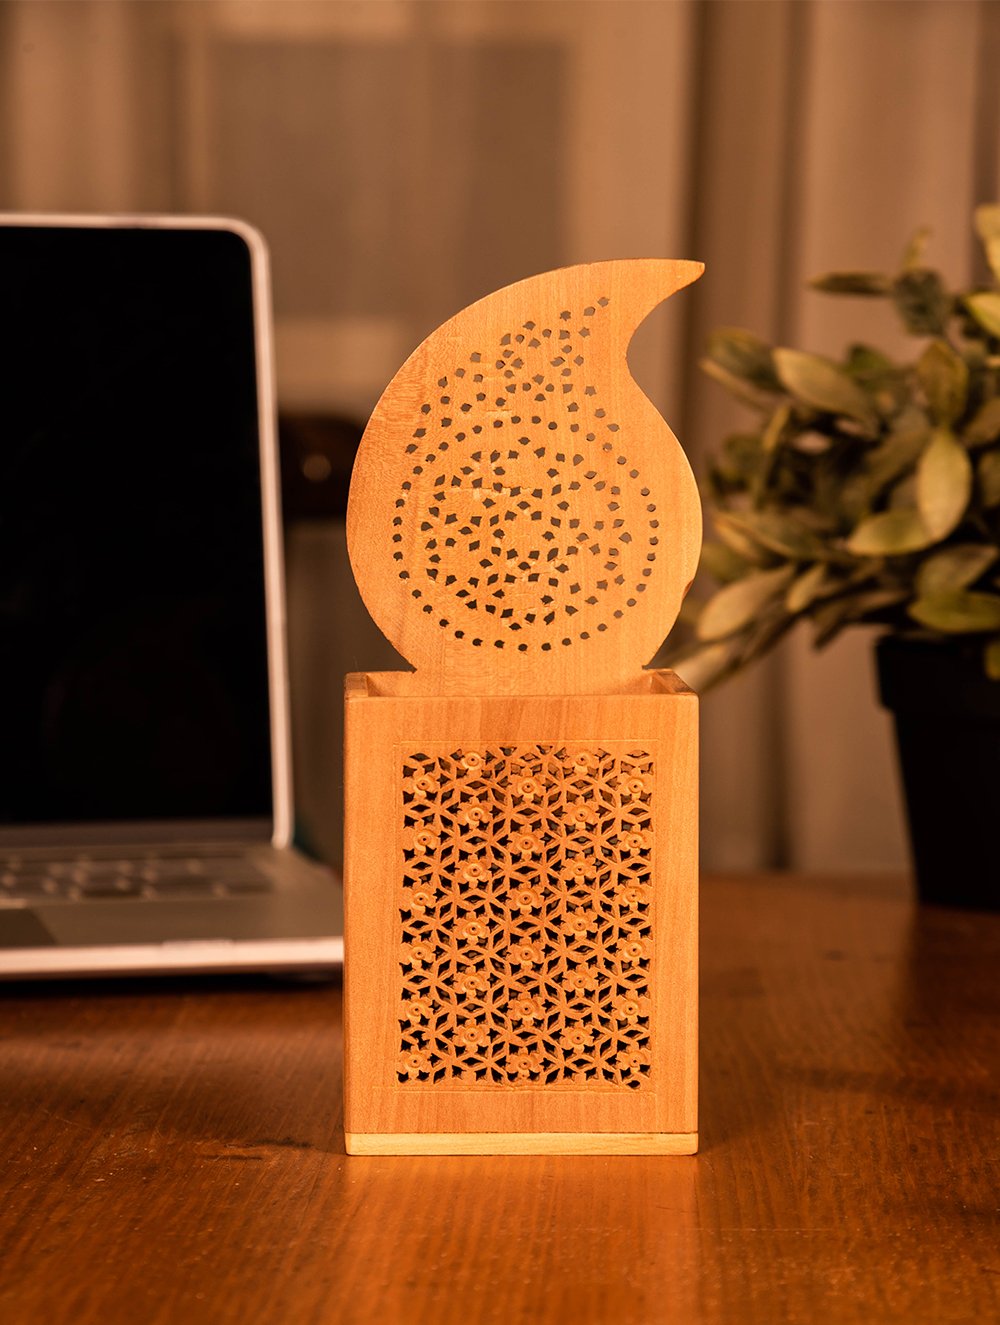 Load image into Gallery viewer, Wooden Jaali Paisley Pen Stand